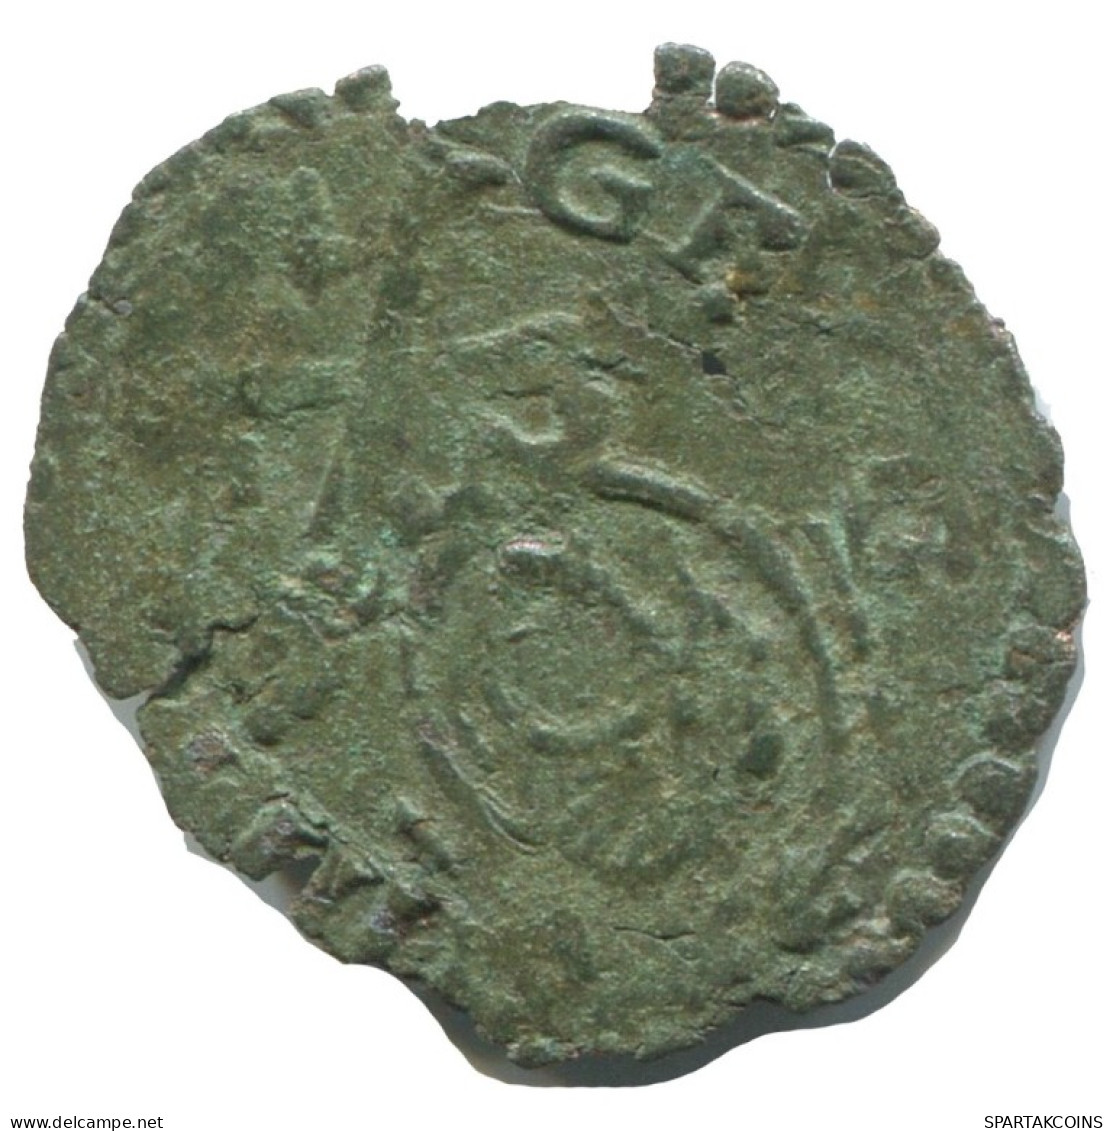 Authentic Original MEDIEVAL EUROPEAN Coin 0.3g/16mm #AC091.8.U.A - Other - Europe